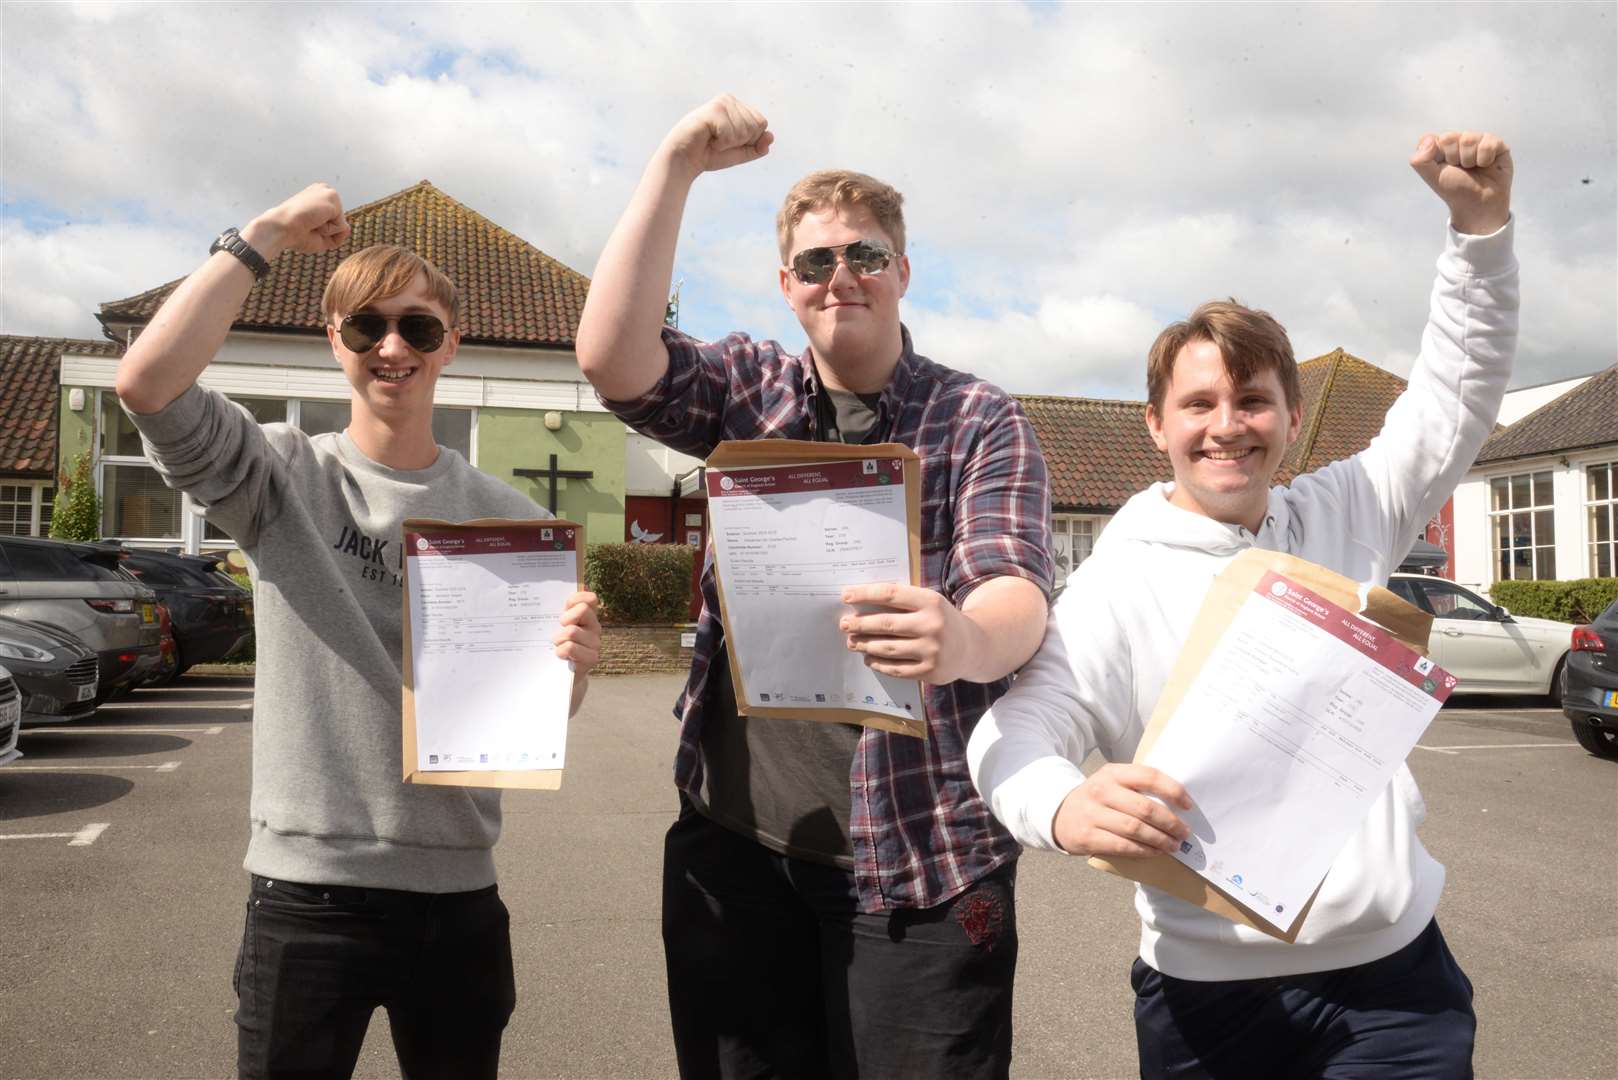 Ben Sayers, Alex Penfold and Bradley Ayling celebrate their A-level results at the St Georges Church of England School, Gravesend